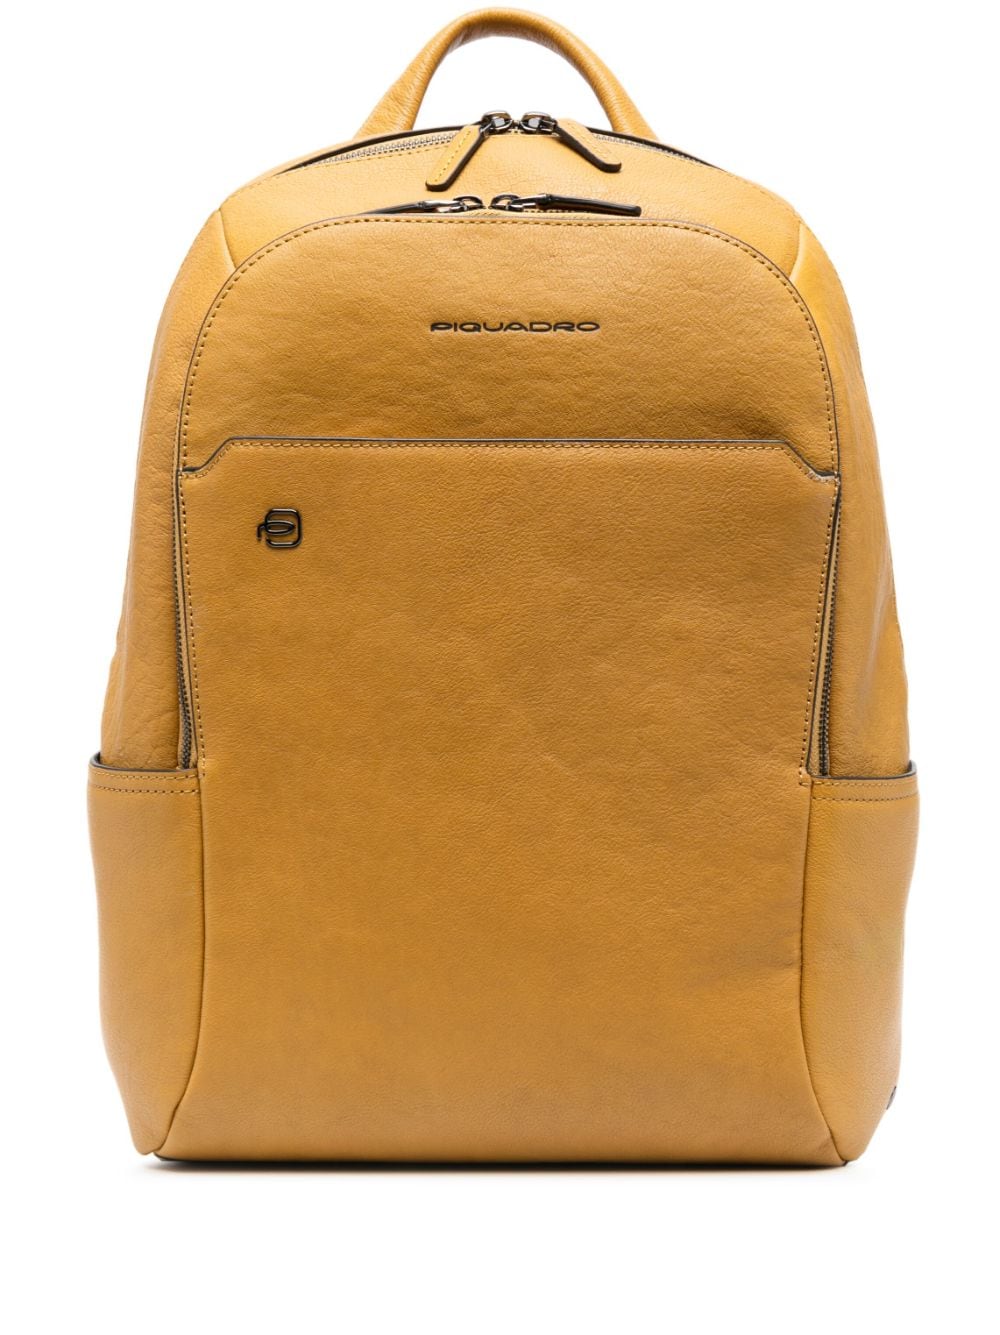 PIQUADRO logo-detail Leather Backpack - Farfetch